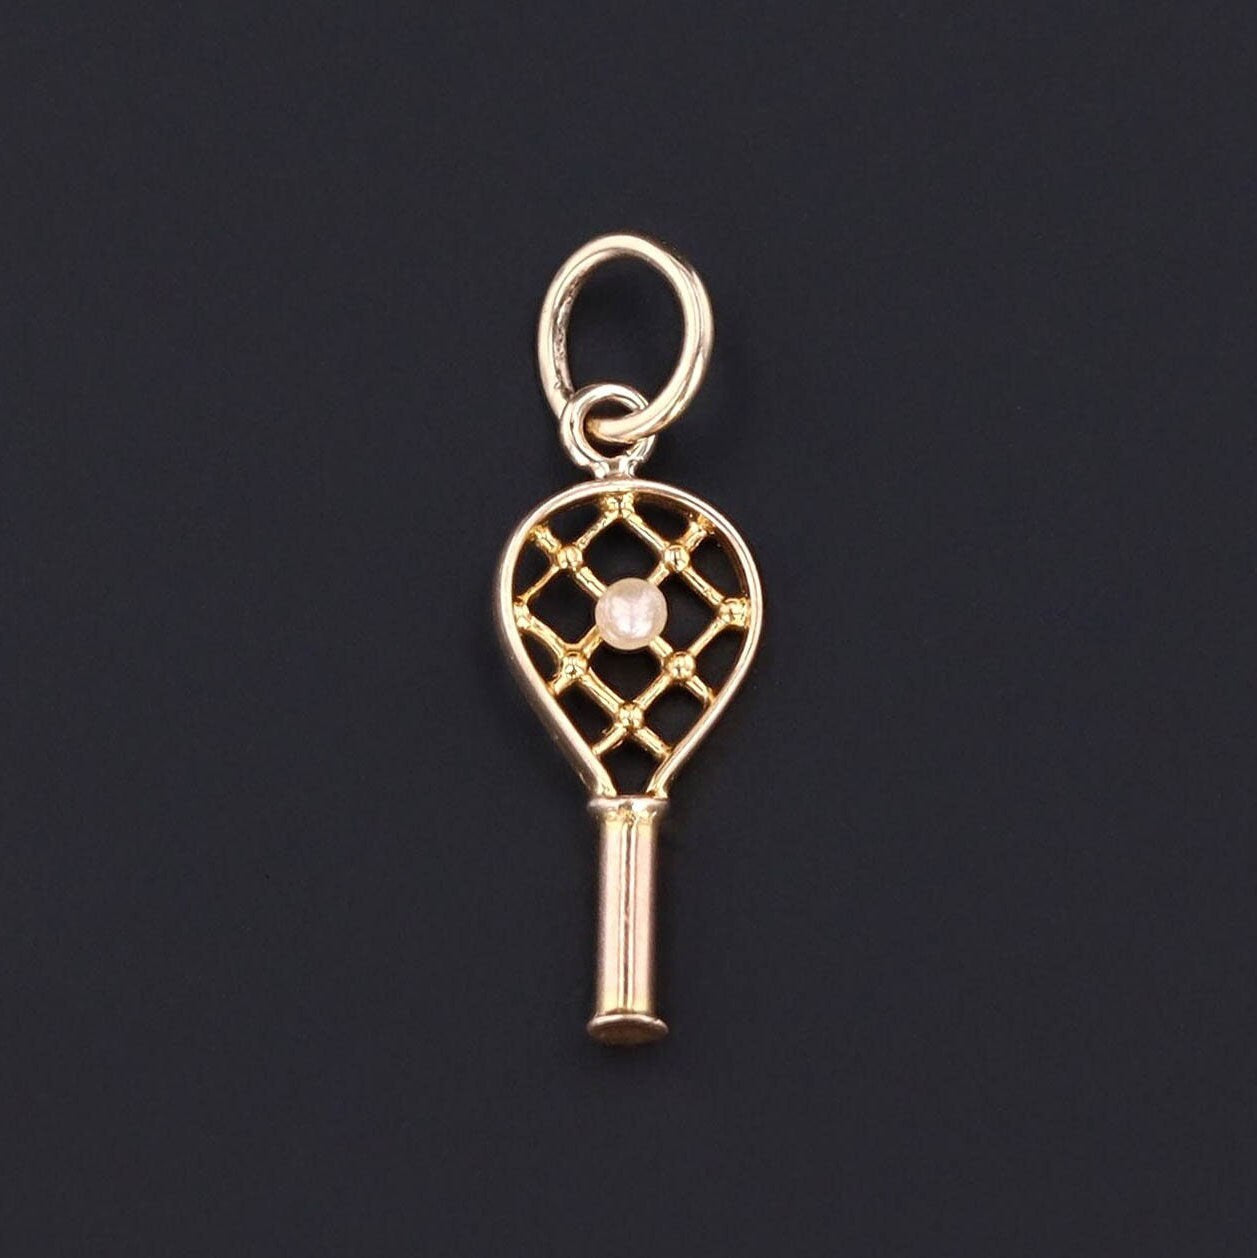 Tennis Racket Charm | 10k Gold Tennis Racket with Pearl 